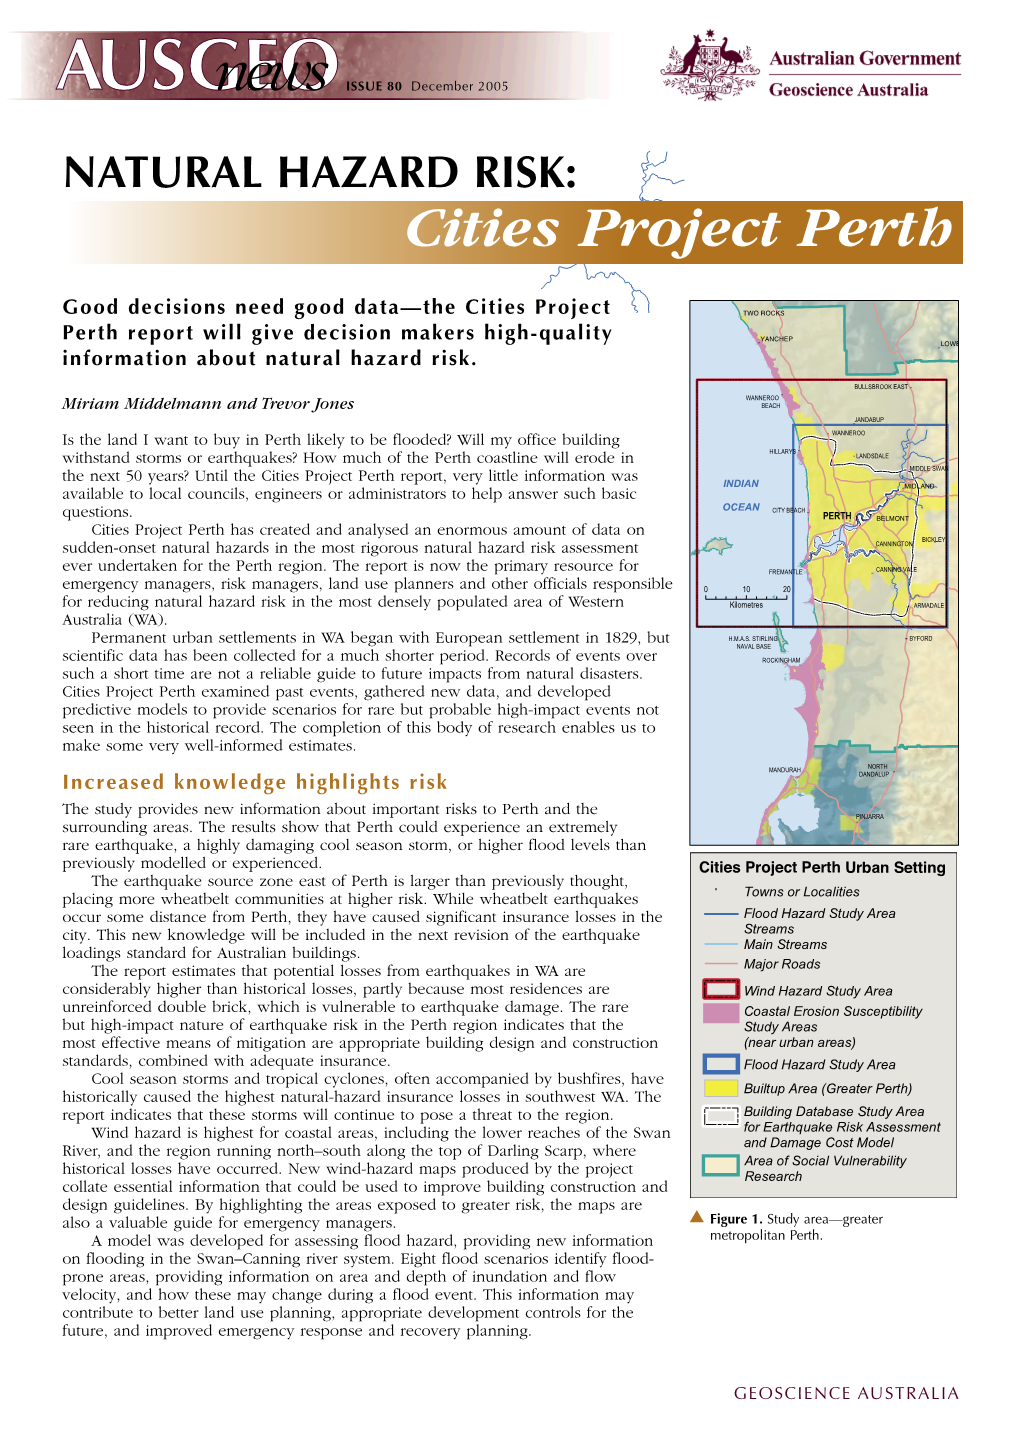 Cities Project Perth